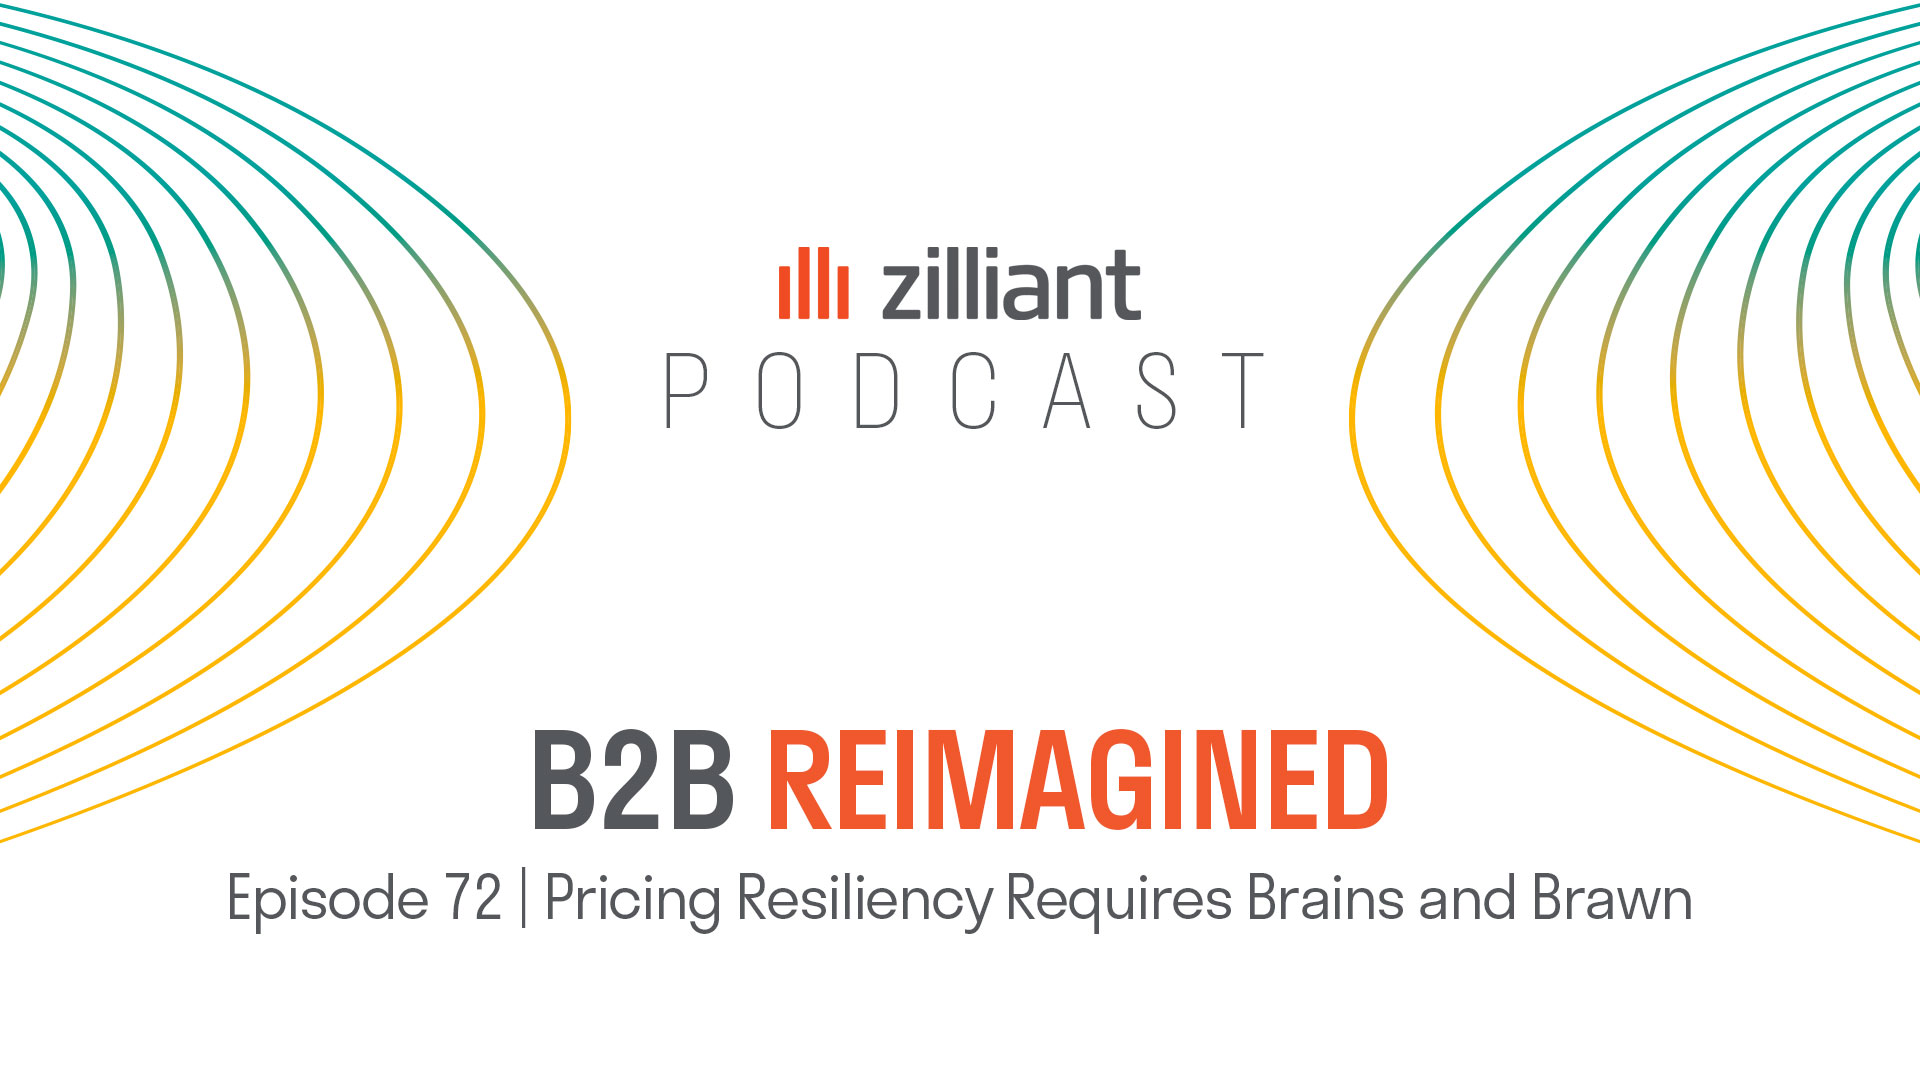 Pricing Resiliency Requires Brains and Brawn with Accenture